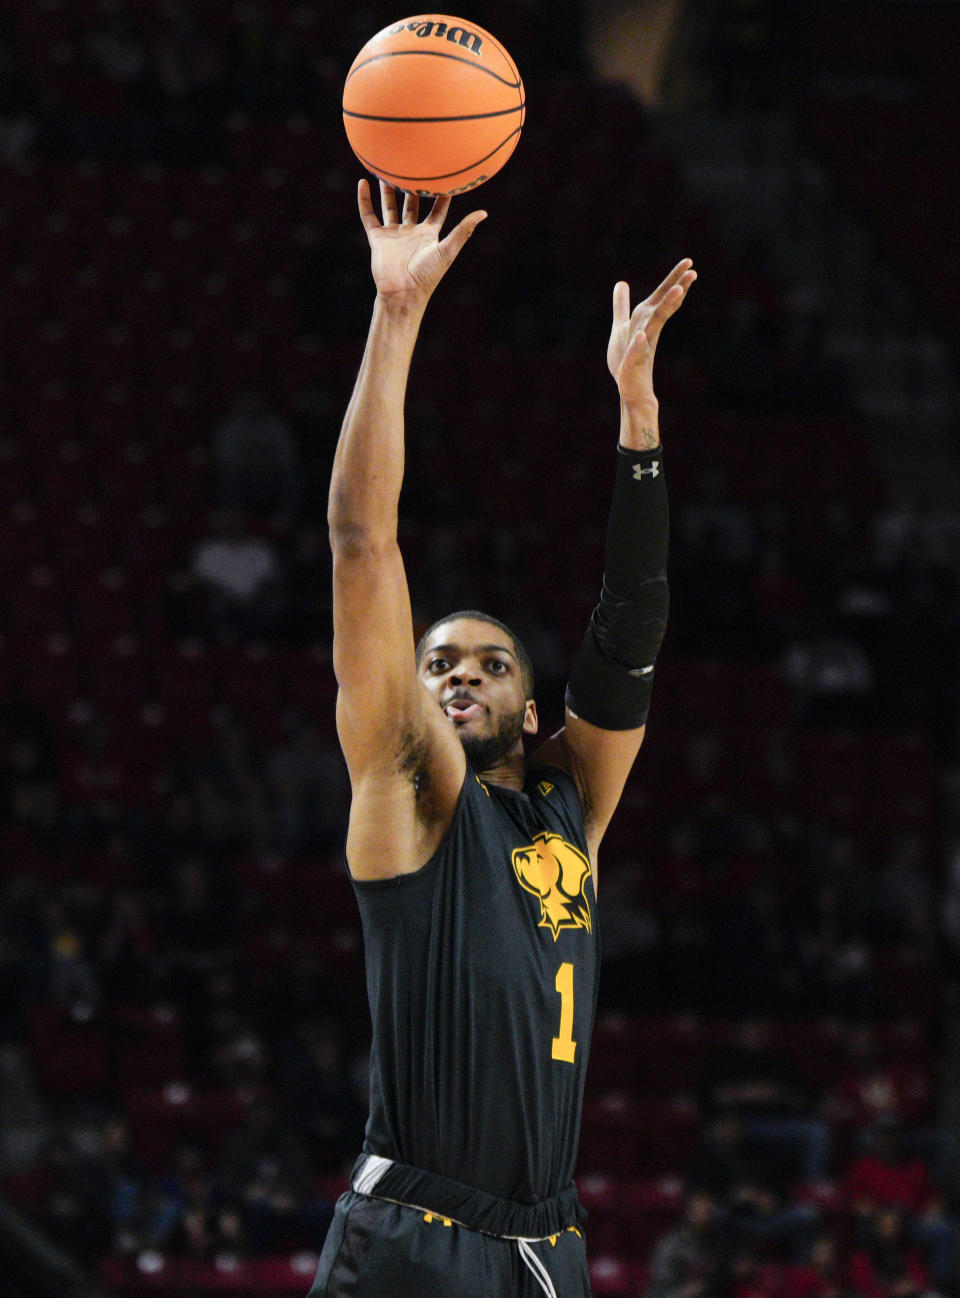 UMBC forward Jarvis Doles (1) shoots against Maryland during the first half of an NCAA college basketball game Thursday, Dec. 29, 2022, in College Park, Md. (AP Photo/Jess Rapfogel)